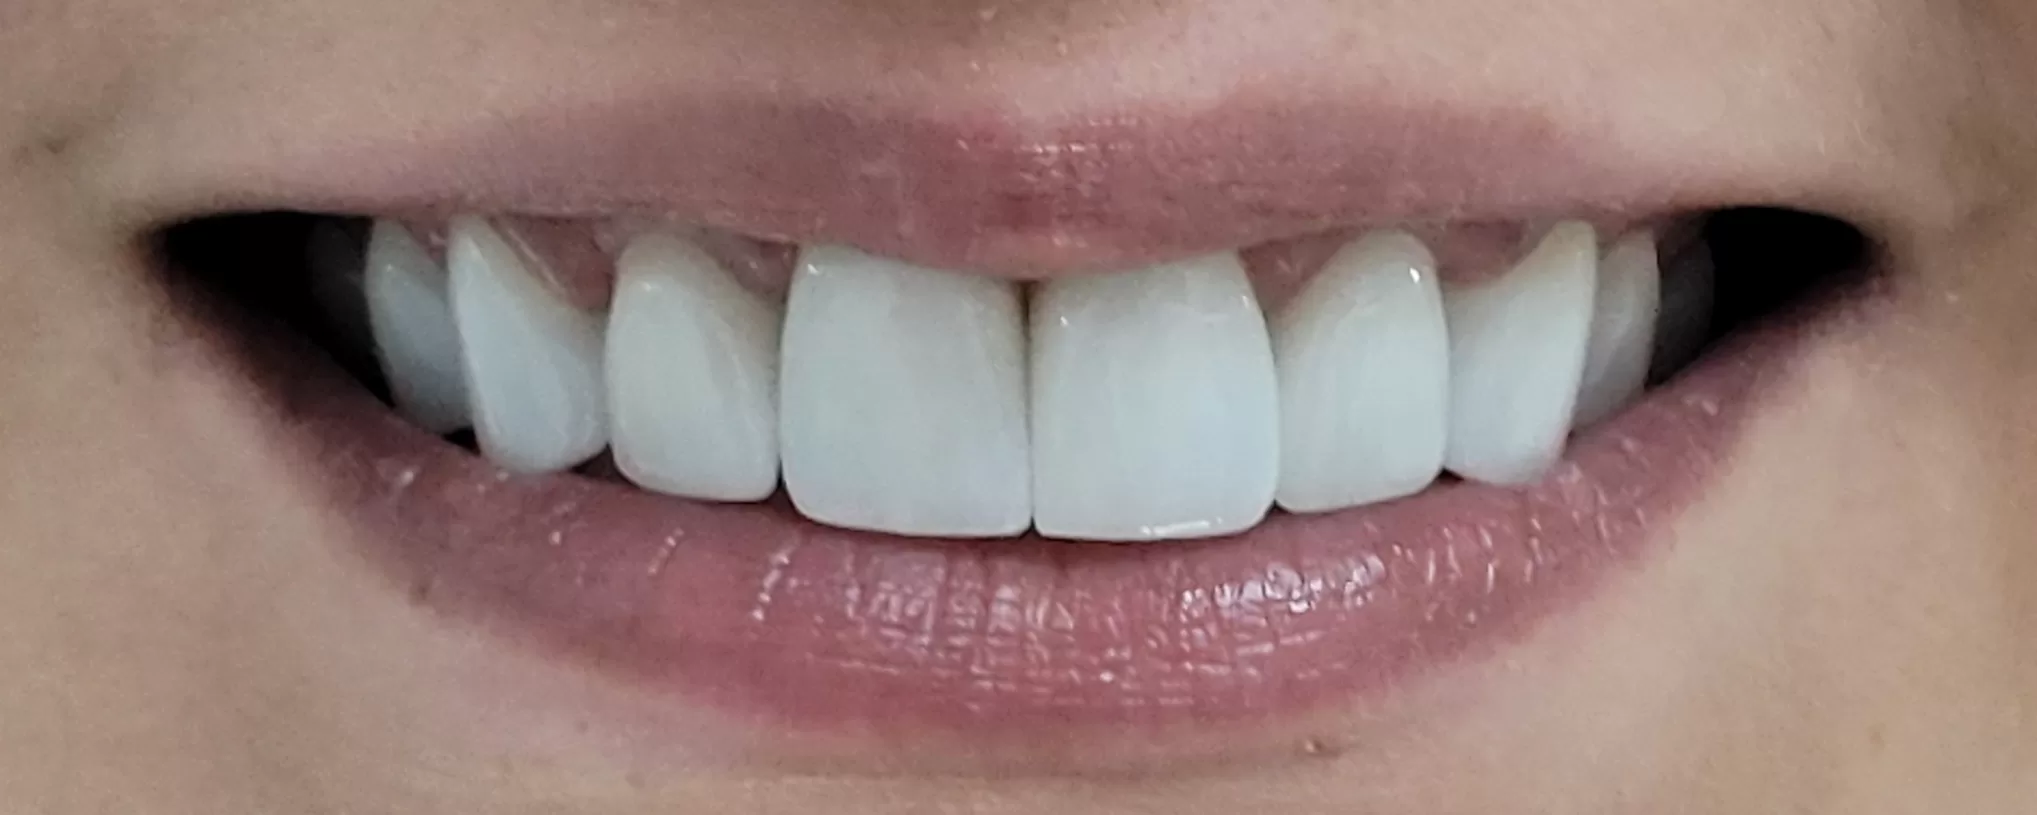 Ceramic crowns on Zirconia and dental implants - AFTER